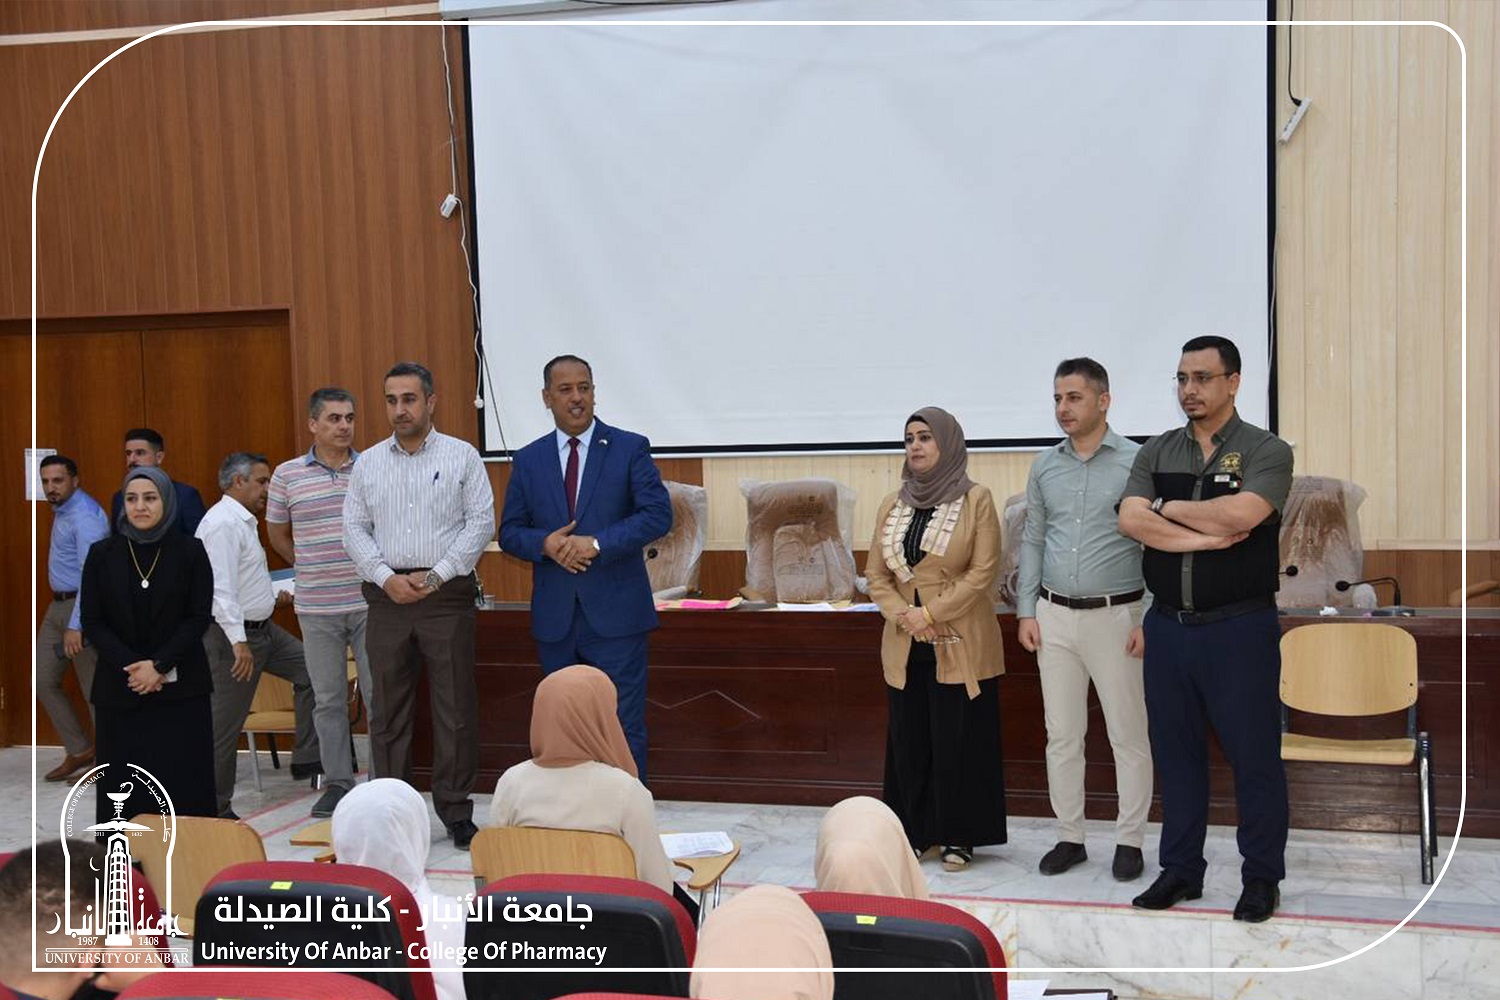 The President of the University inspects the final exams for the students of the Faculty of Pharmacy